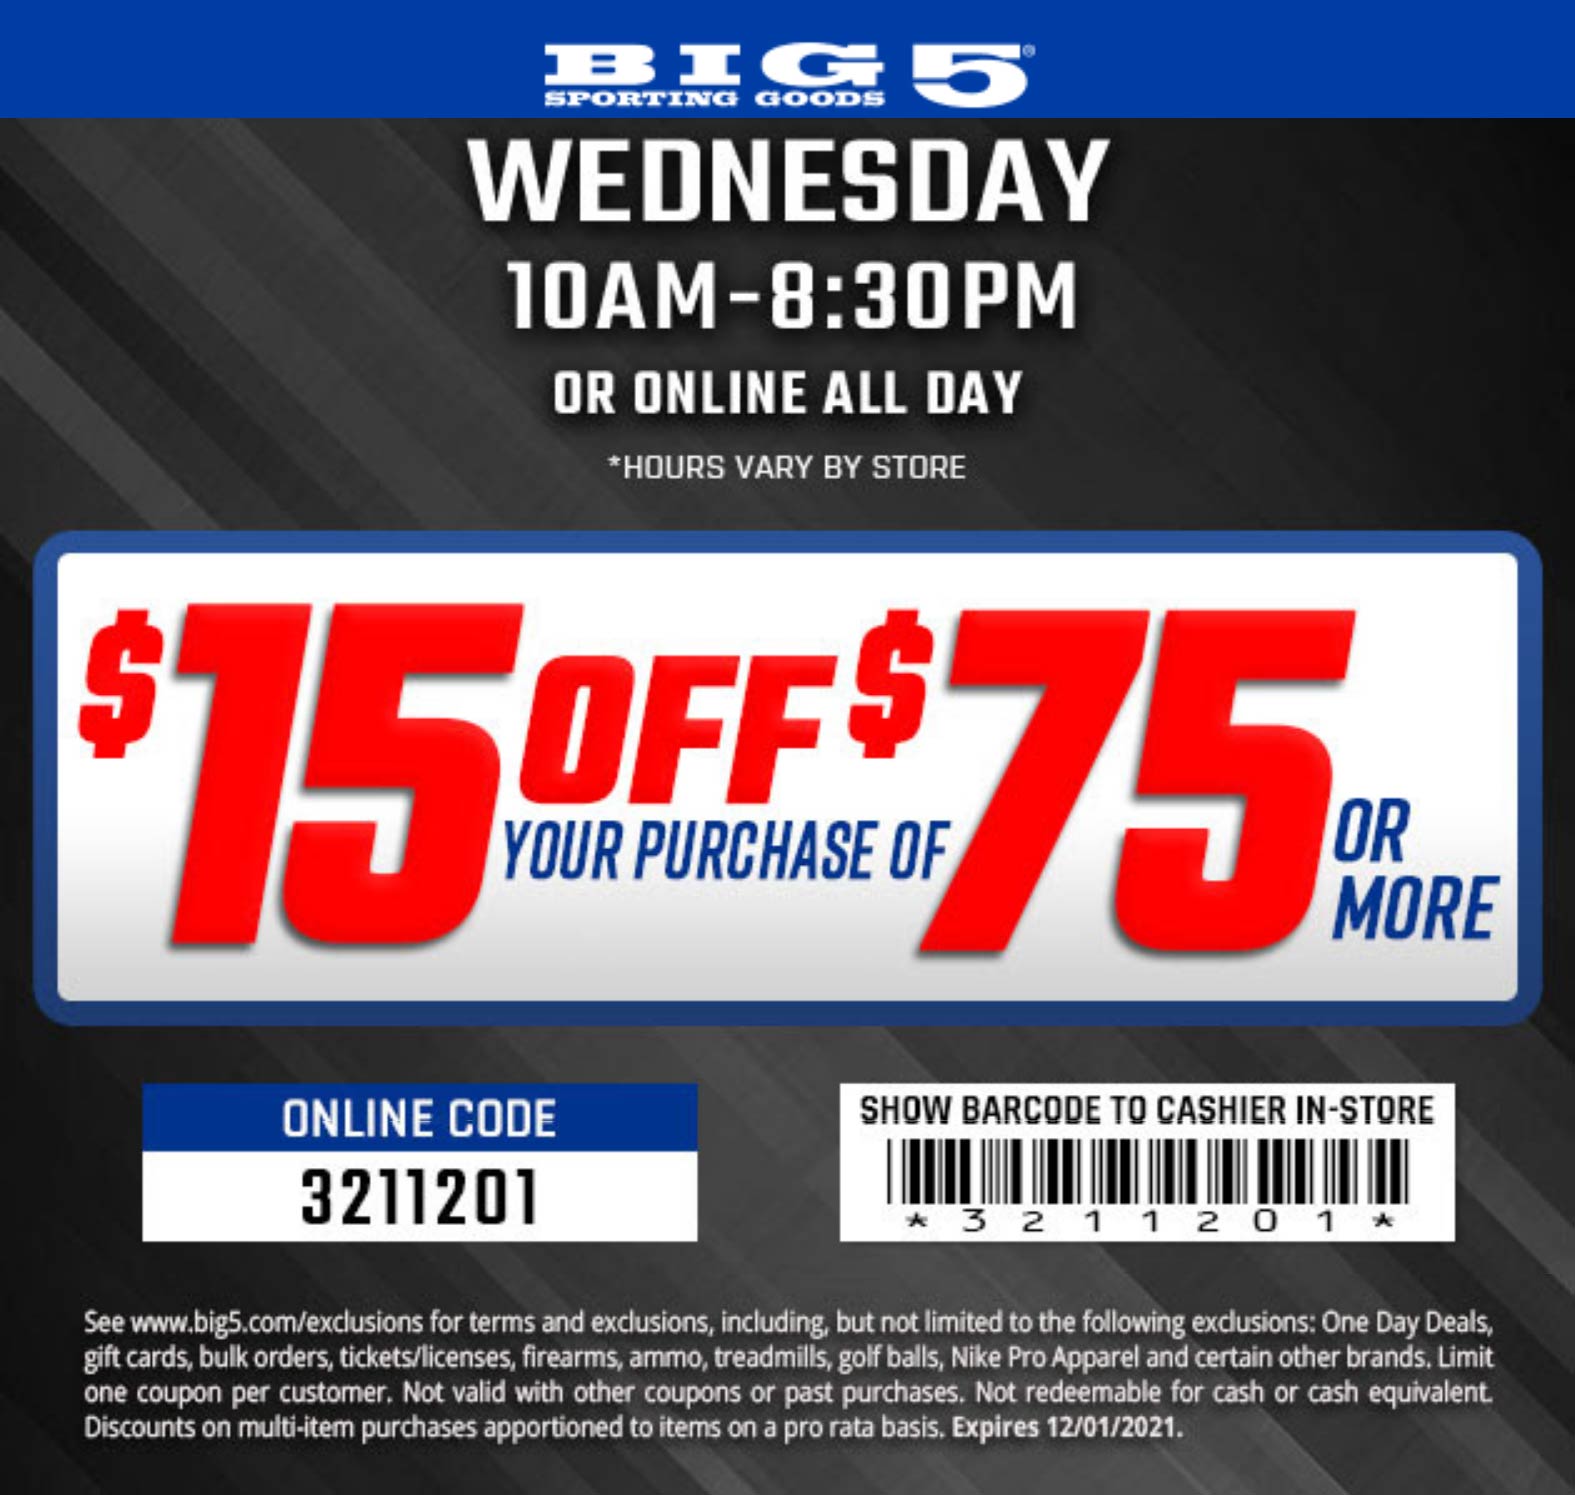 Big 5 stores Coupon  $15 off $75 today at Big 5 sporting goods, or online via promo code 3211201 #big5 